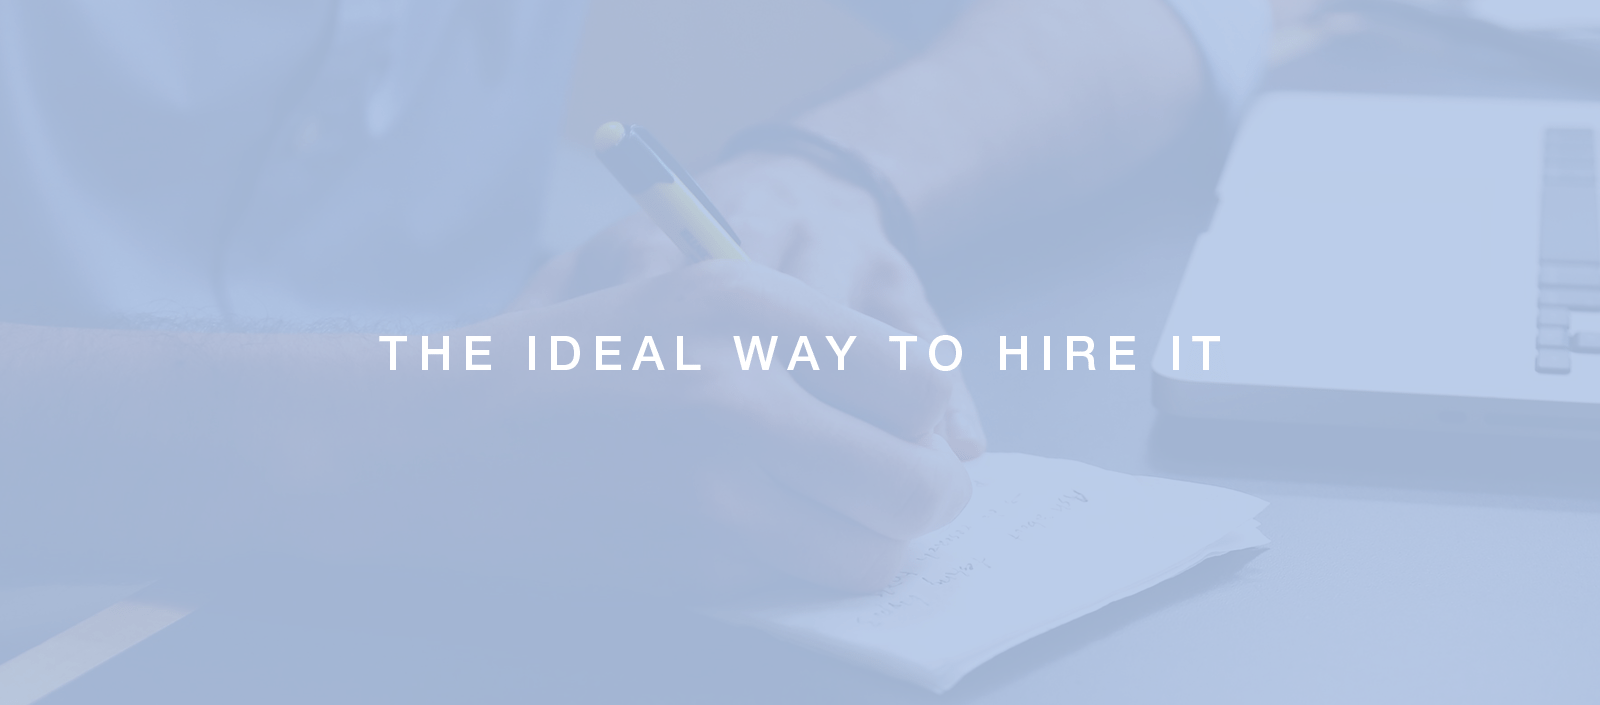 Hire IT: Ideal Ways Hiring Guide: Hire IT Professionals – Stay Ahead